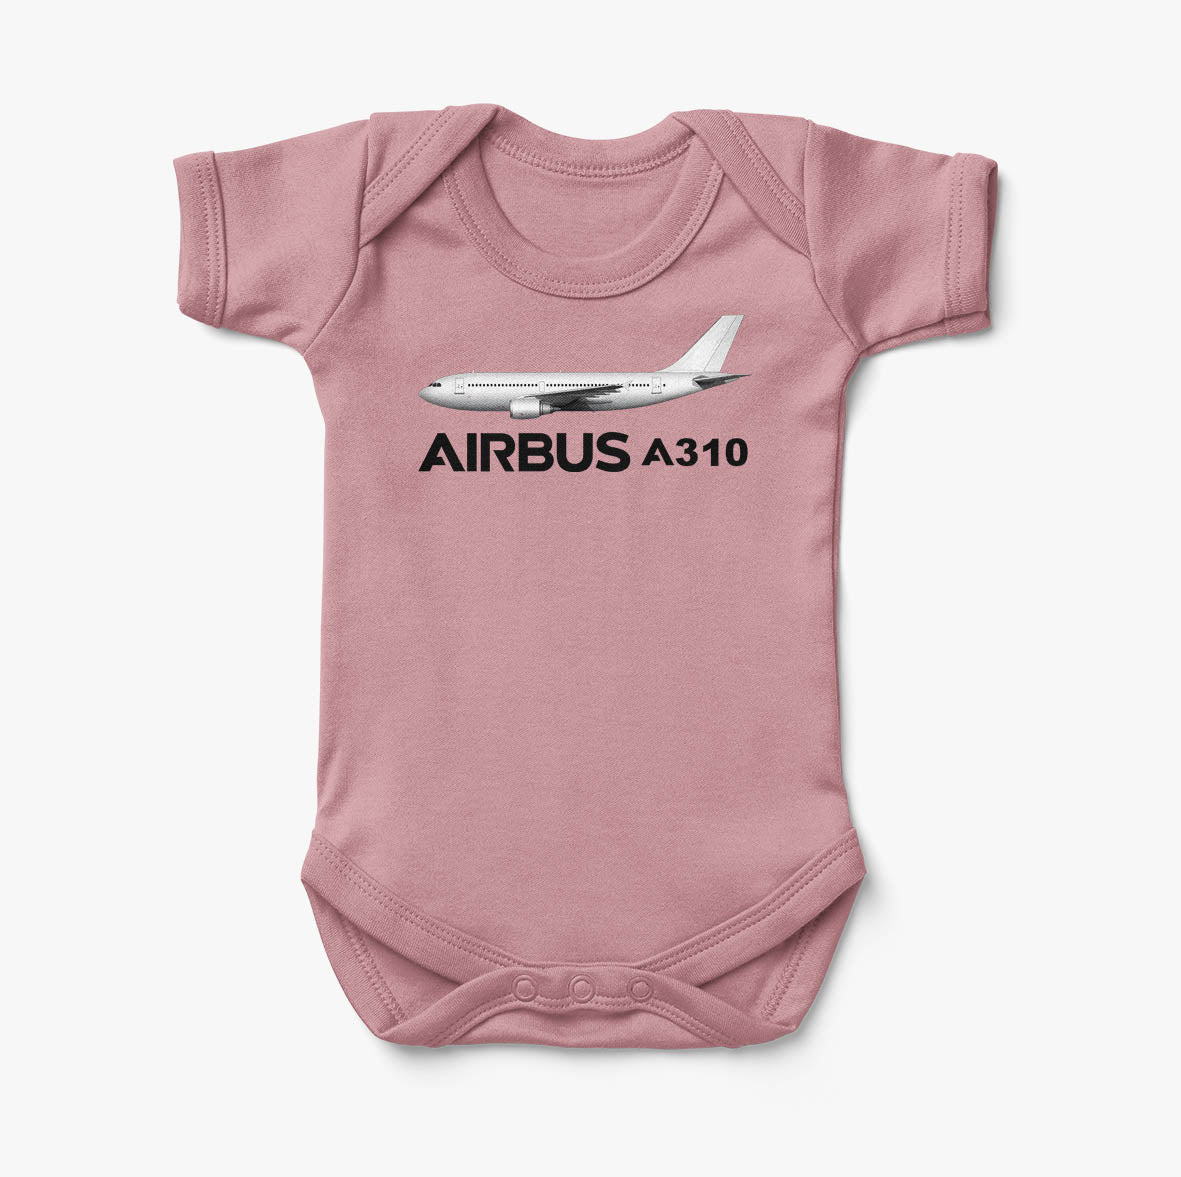 The Airbus A310 Designed Baby Bodysuits